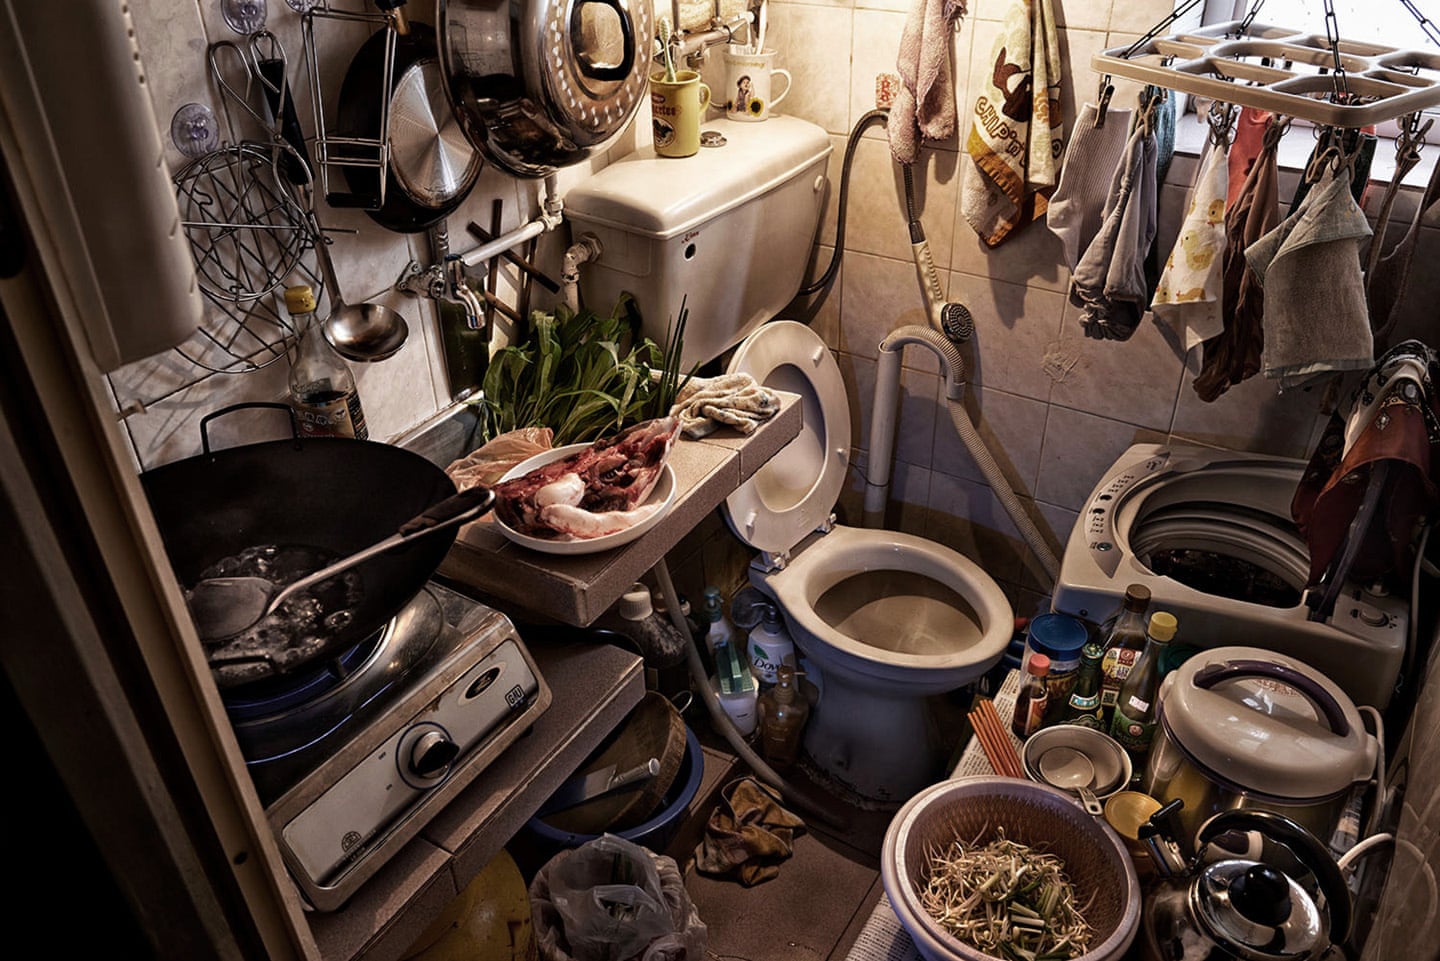 There is no word in this picture. It shows cooking, using the washroom and washing the clothes in the tiny living space.